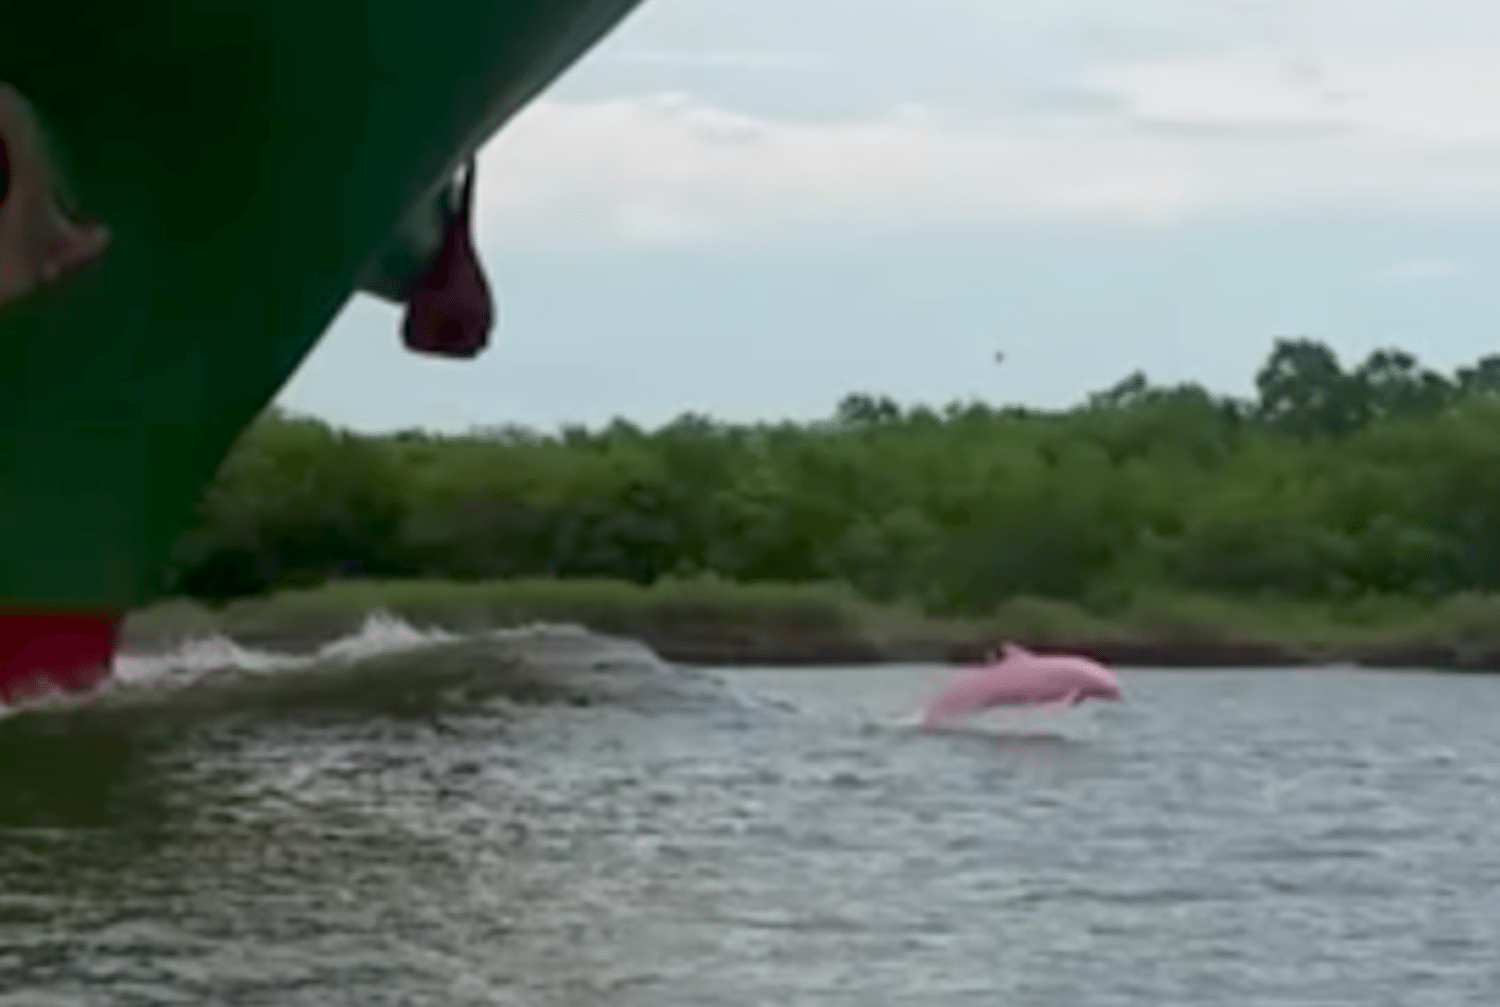 A rare pink dolphin was spotted in Louisiana